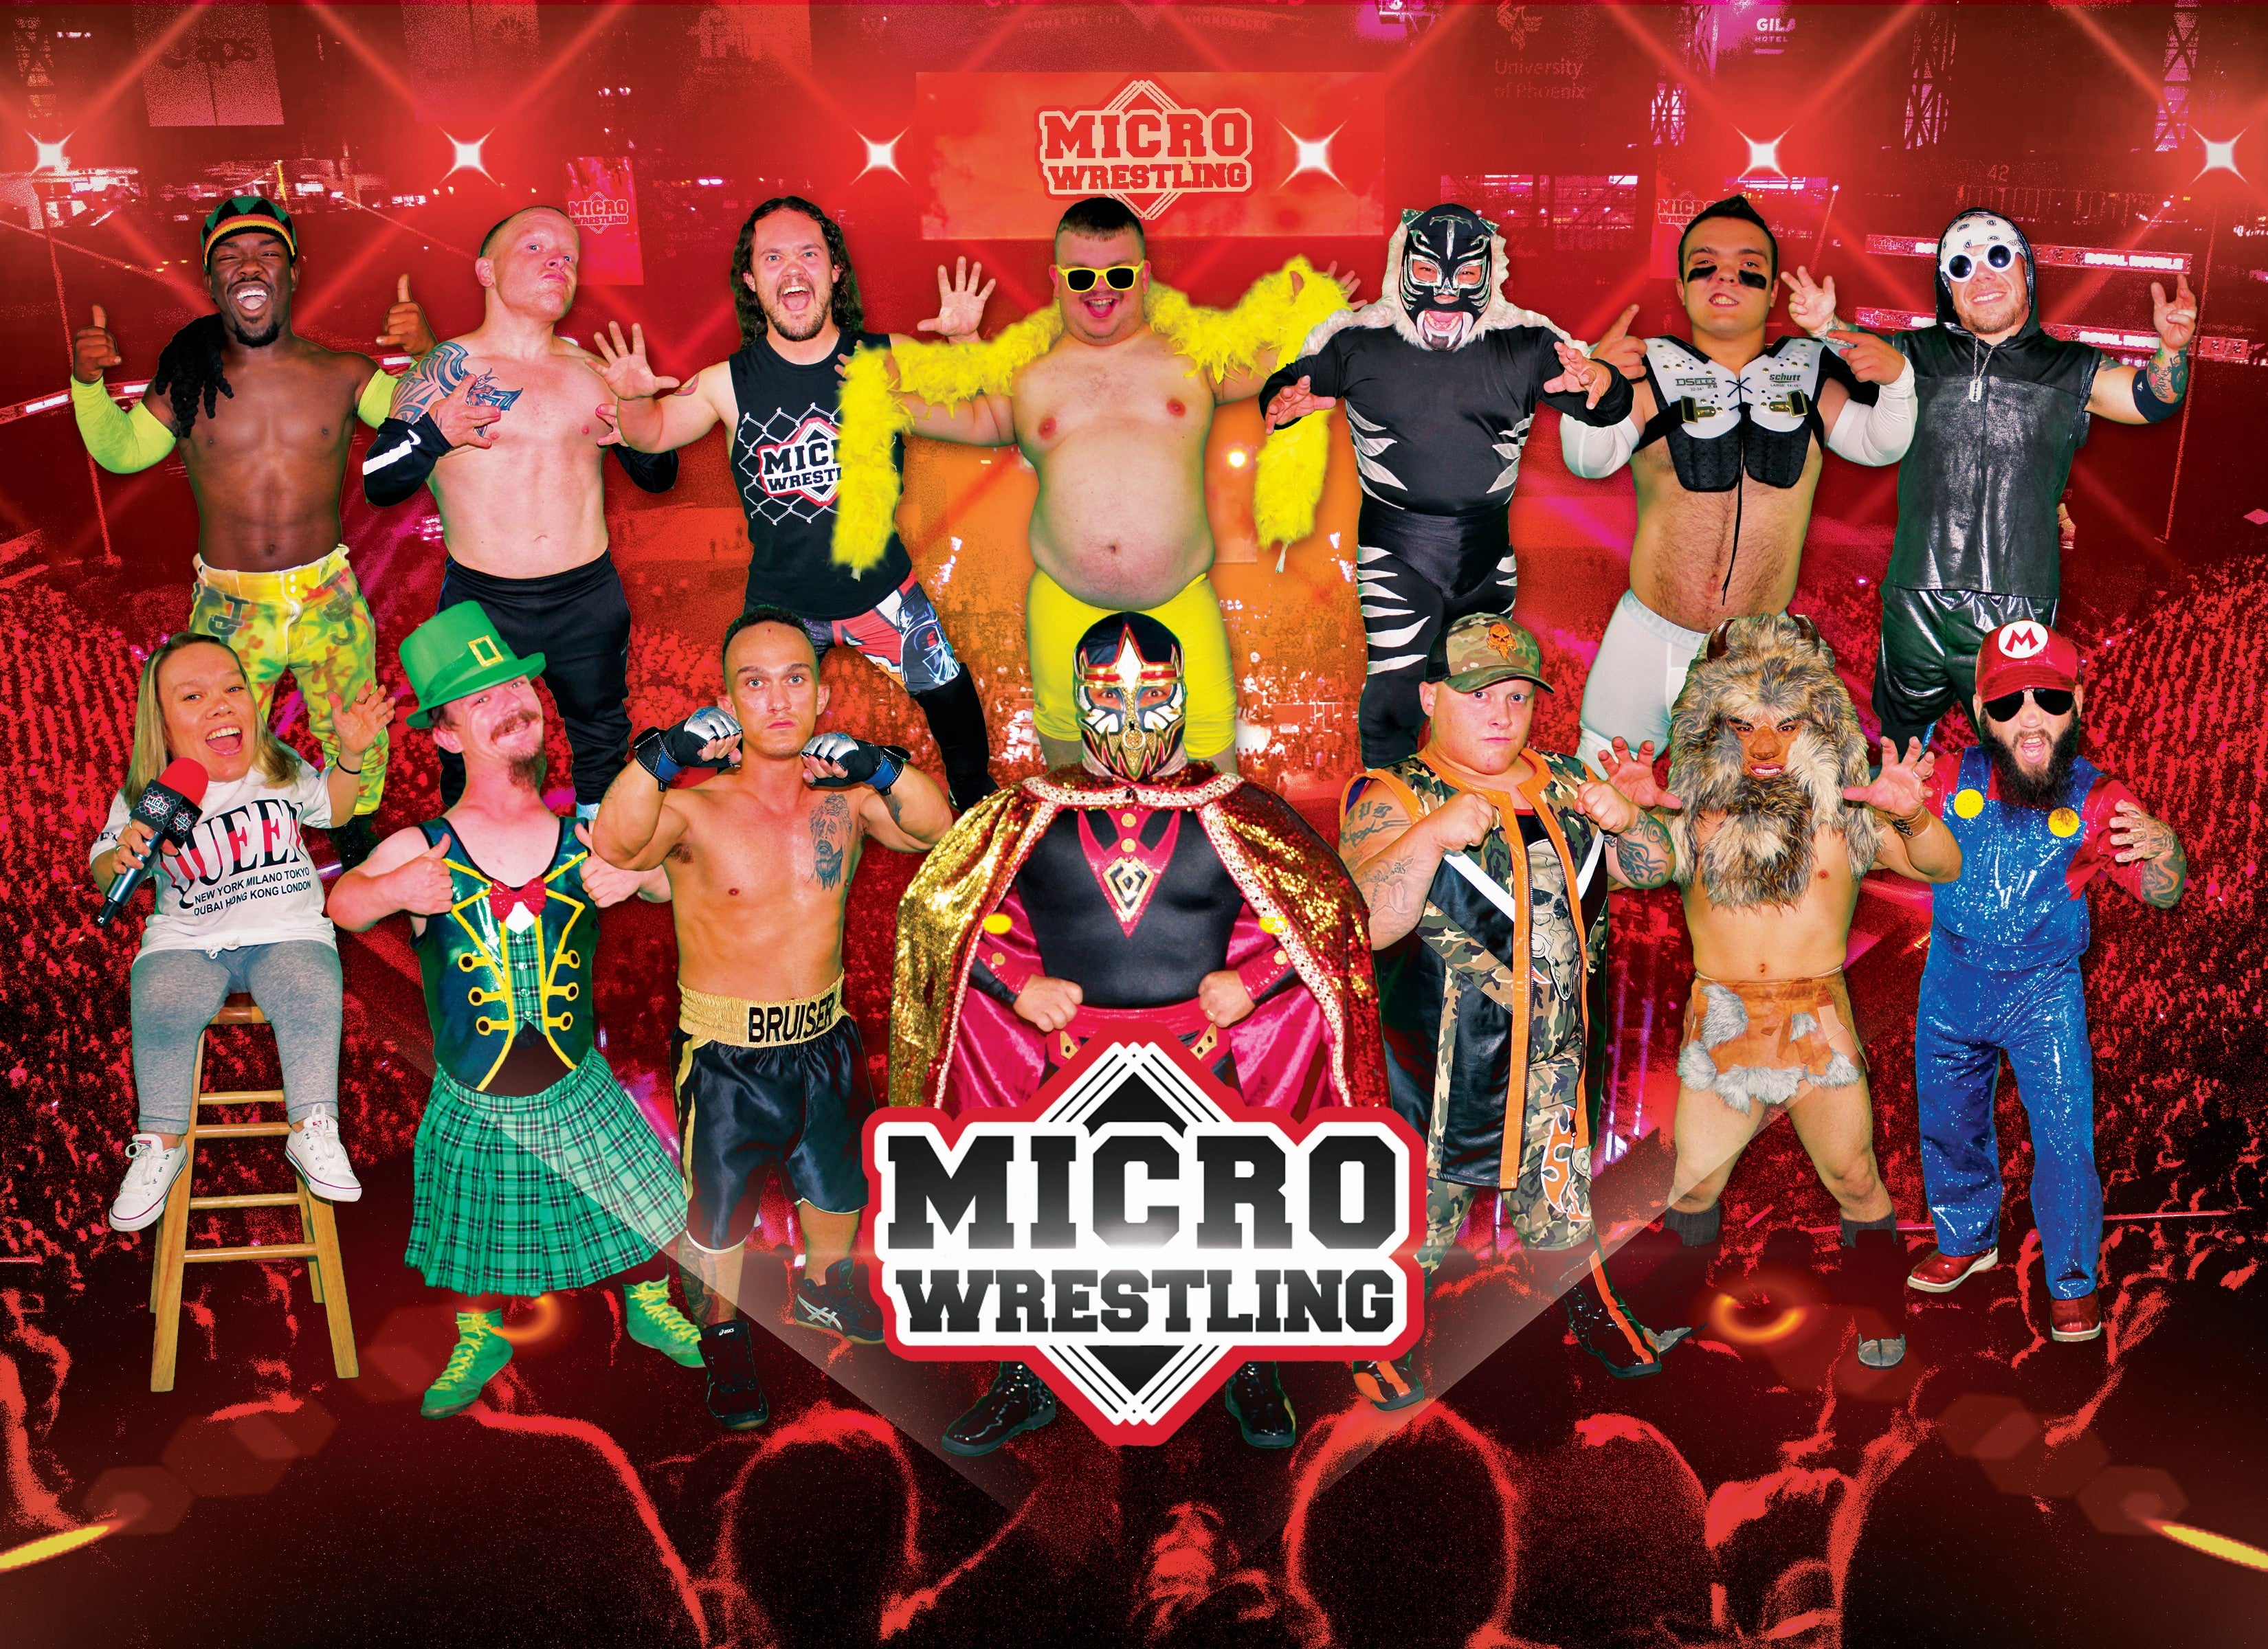 All-Ages Micro Wrestling at the Microtorium of Pigeon Forge at The Microtorium – Pigeon Forge, TN